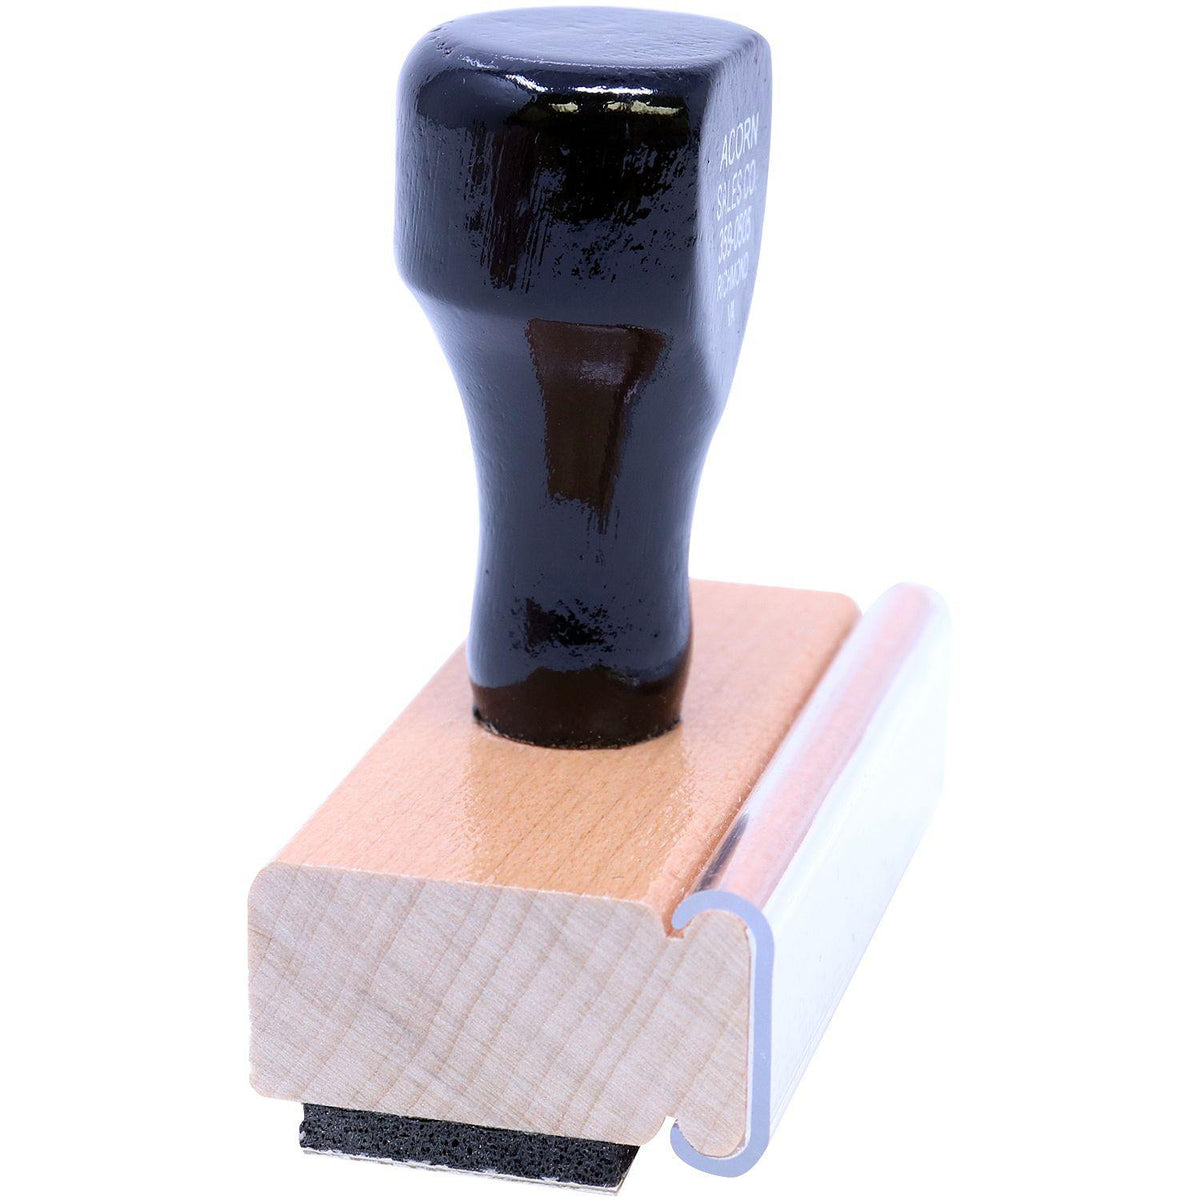 Side View of Capitation Rubber Stamp at an Angle